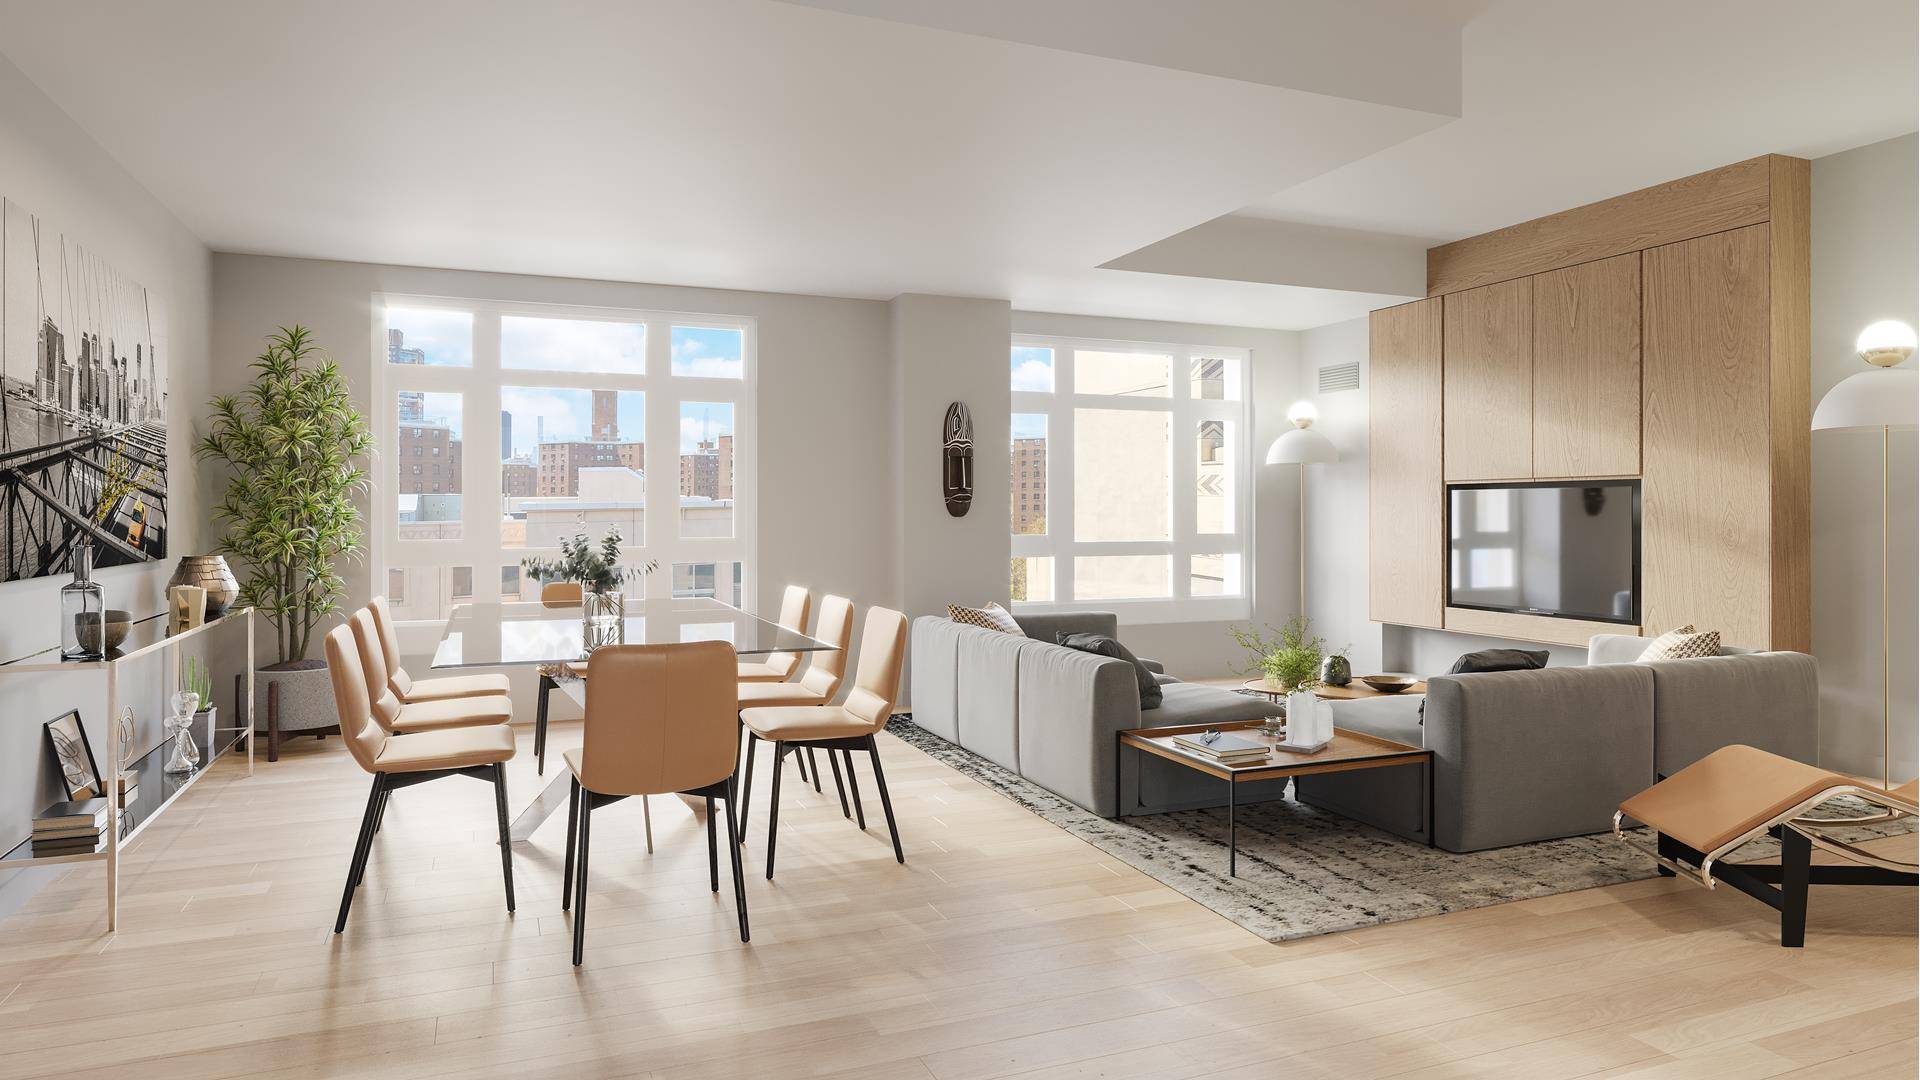 Amazing Price. Act Fast. Brand new north facing 1 BdRm 1 bath condominium residence with large terrace at the PATAGONIA, a ground up 12 story development just now completed in ...